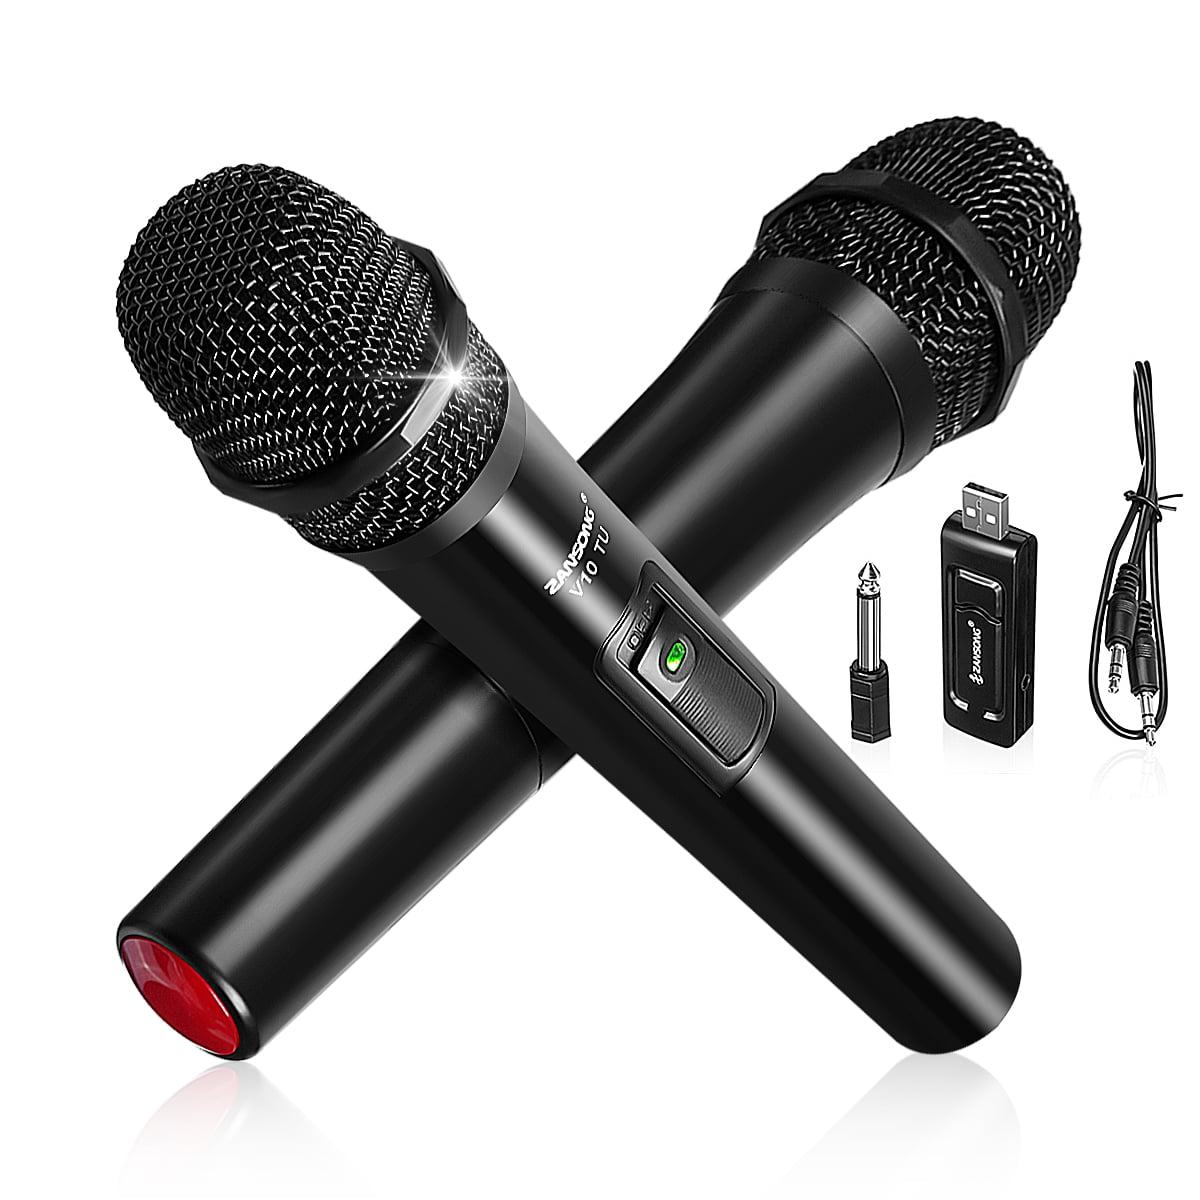 Professional Wireless Handheld Dynamic Microphone System Karaoke Microphone for Family KTV Conferences Education Wireless Microphone Parties etc. Advertising